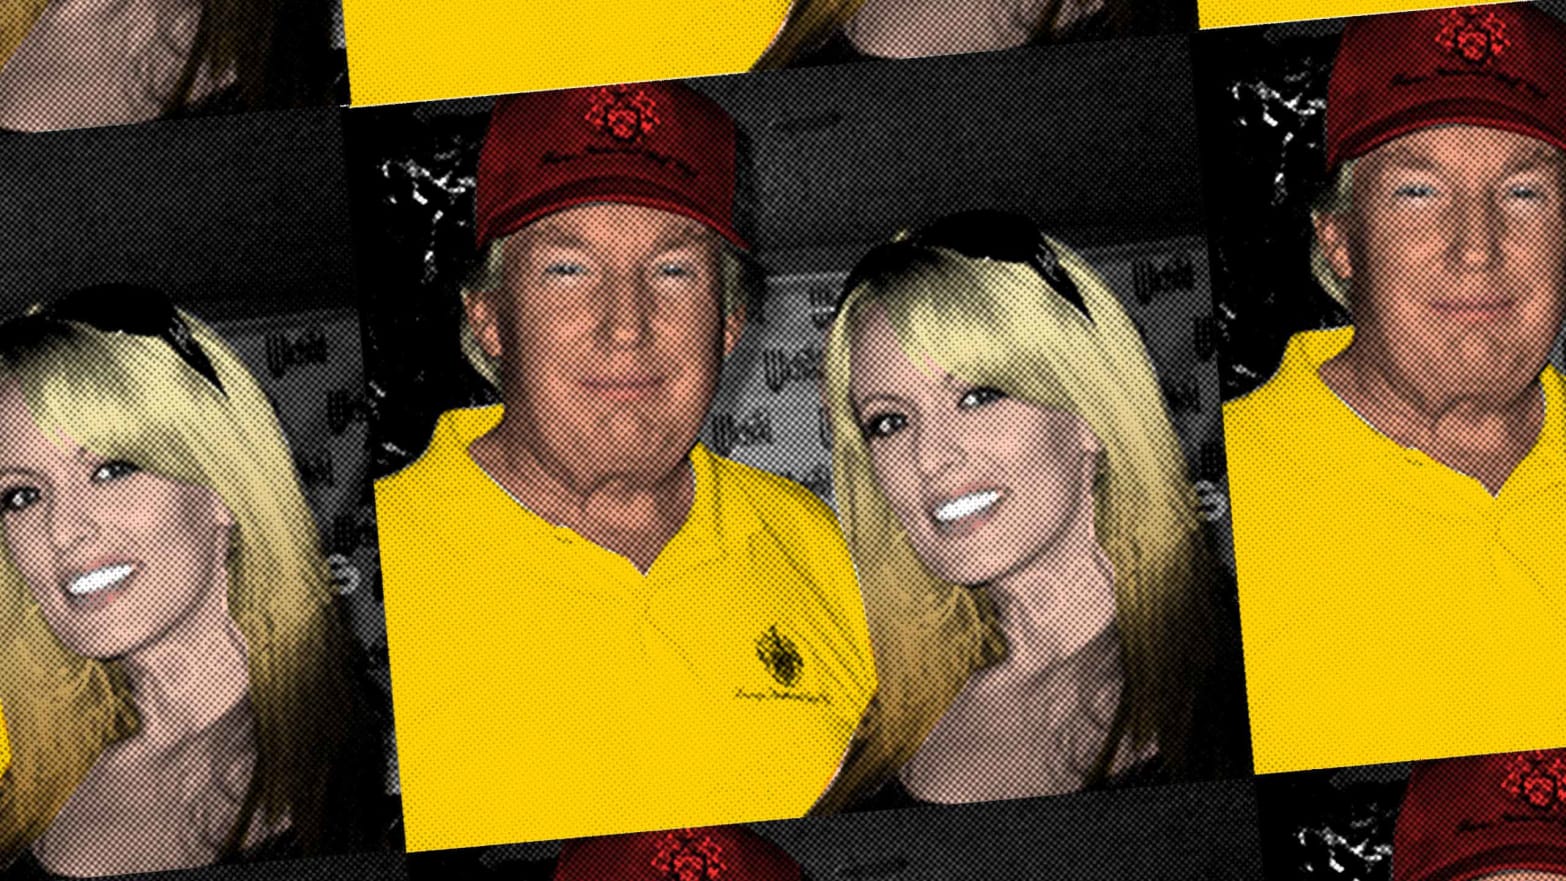 Porn Star: Donald Trump and Stormy Daniels Invited Me to ...